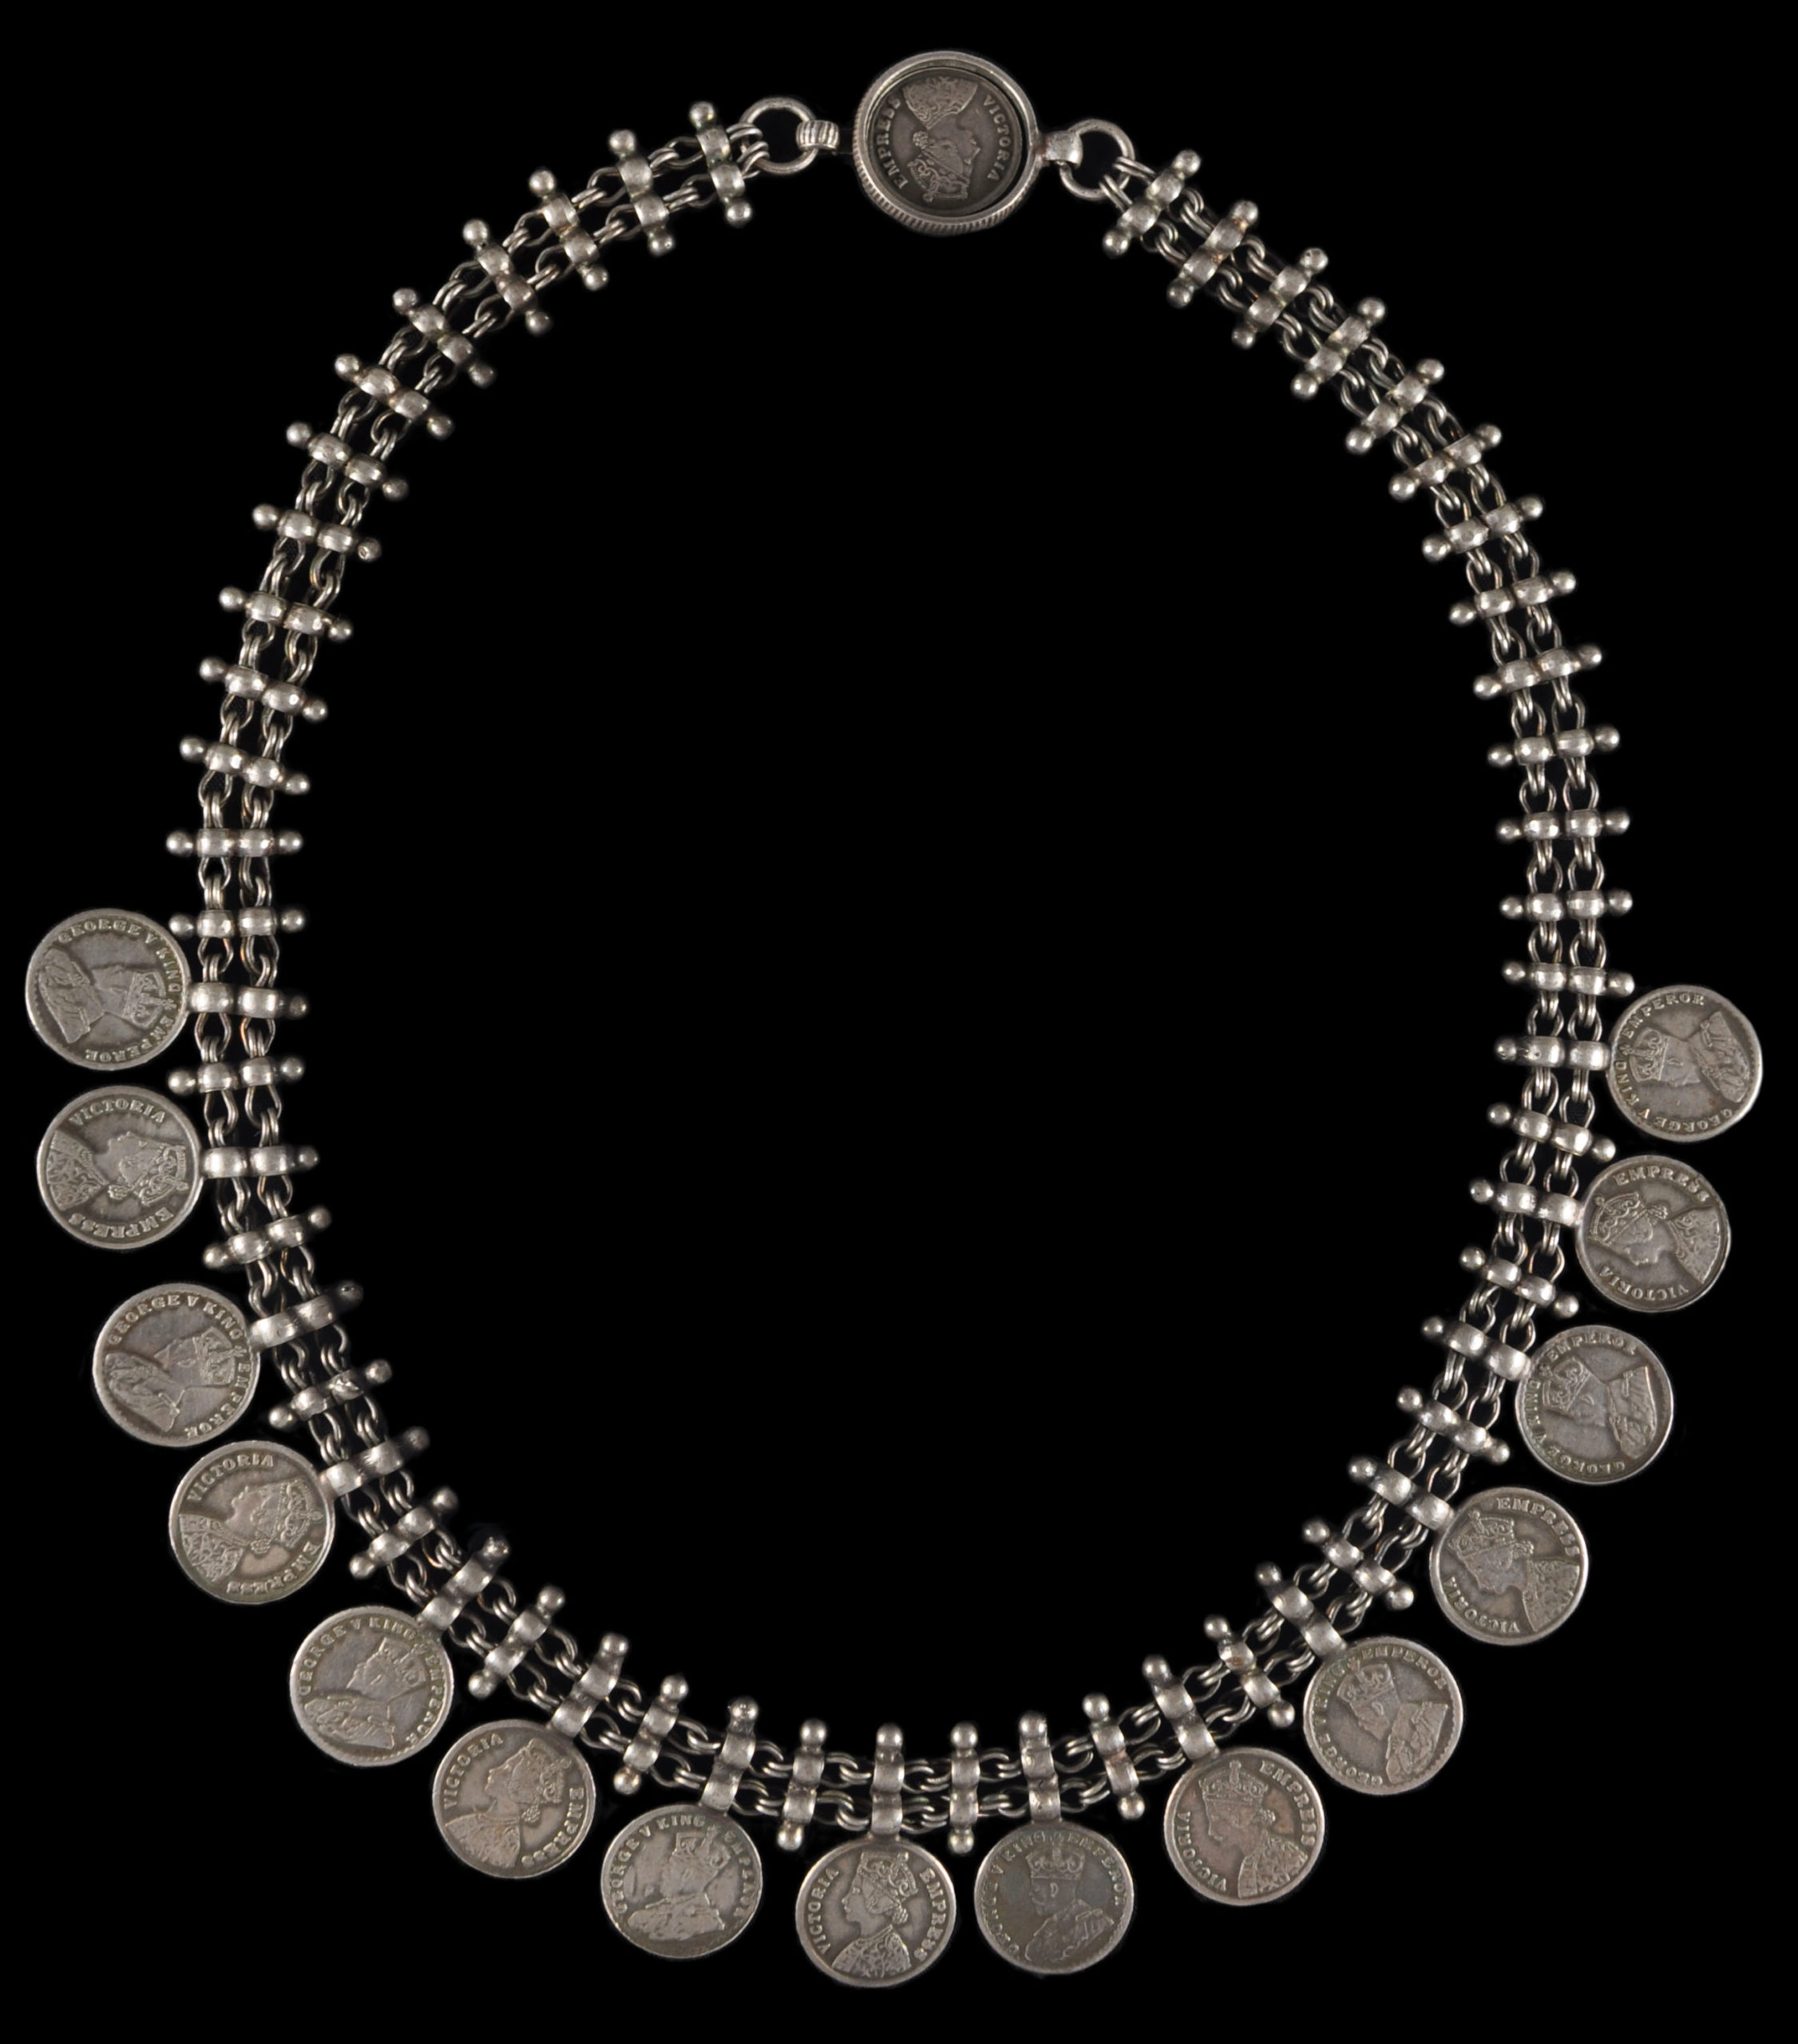 https://www.michaelbackmanltd.com/wp-content/uploads/2019/07/6066-Indian-Silver-Coin-Necklace-10-scaled.jpg